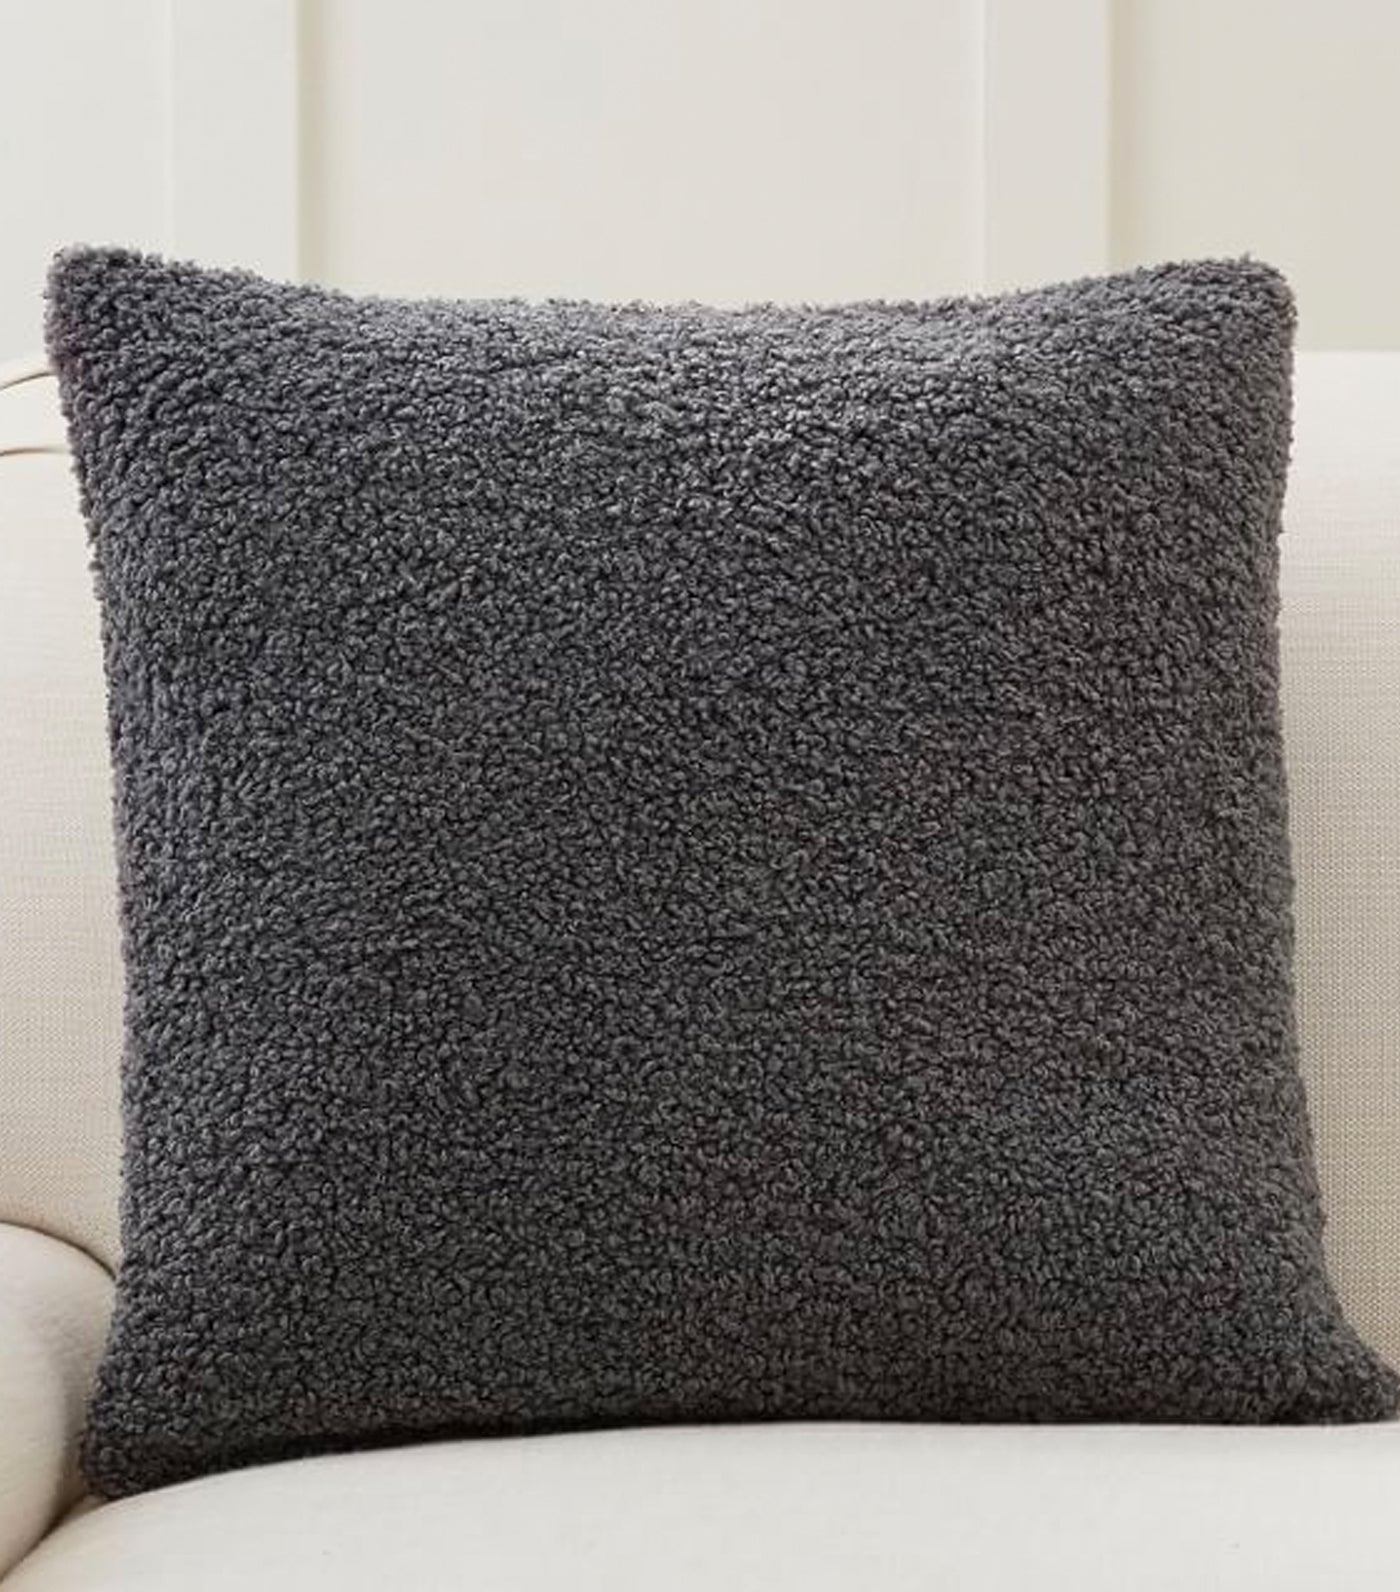 Pottery Barn Cozy Teddy Faux Fur Pillow Cover